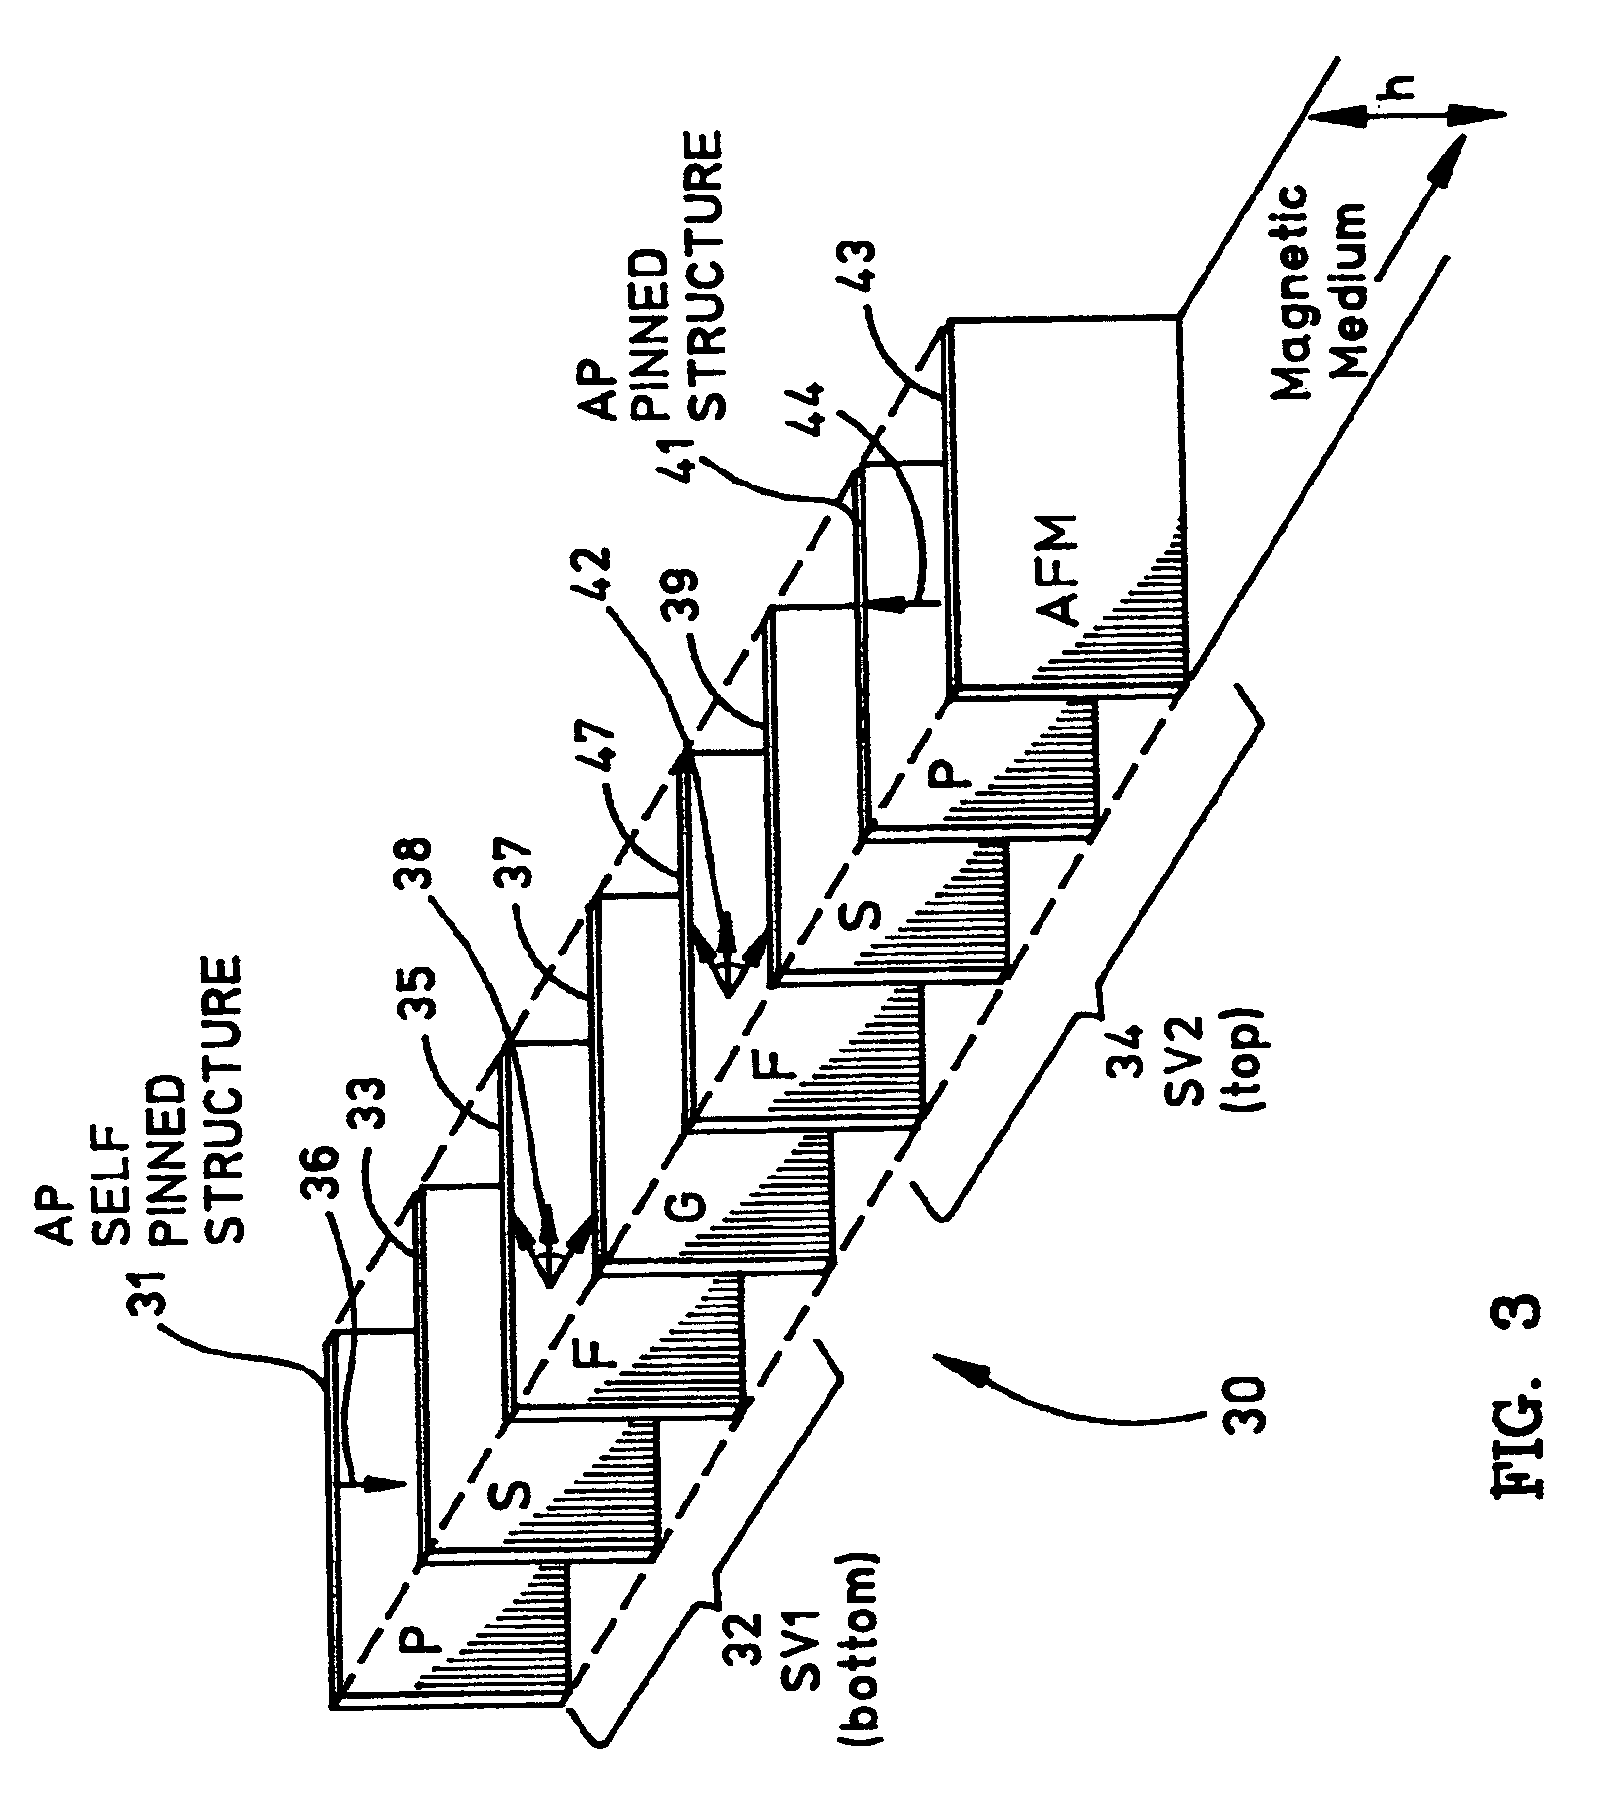 Thin differential spin valve sensor having both pinned and self pinned structures for reduced difficulty in AFM layer polarity setting